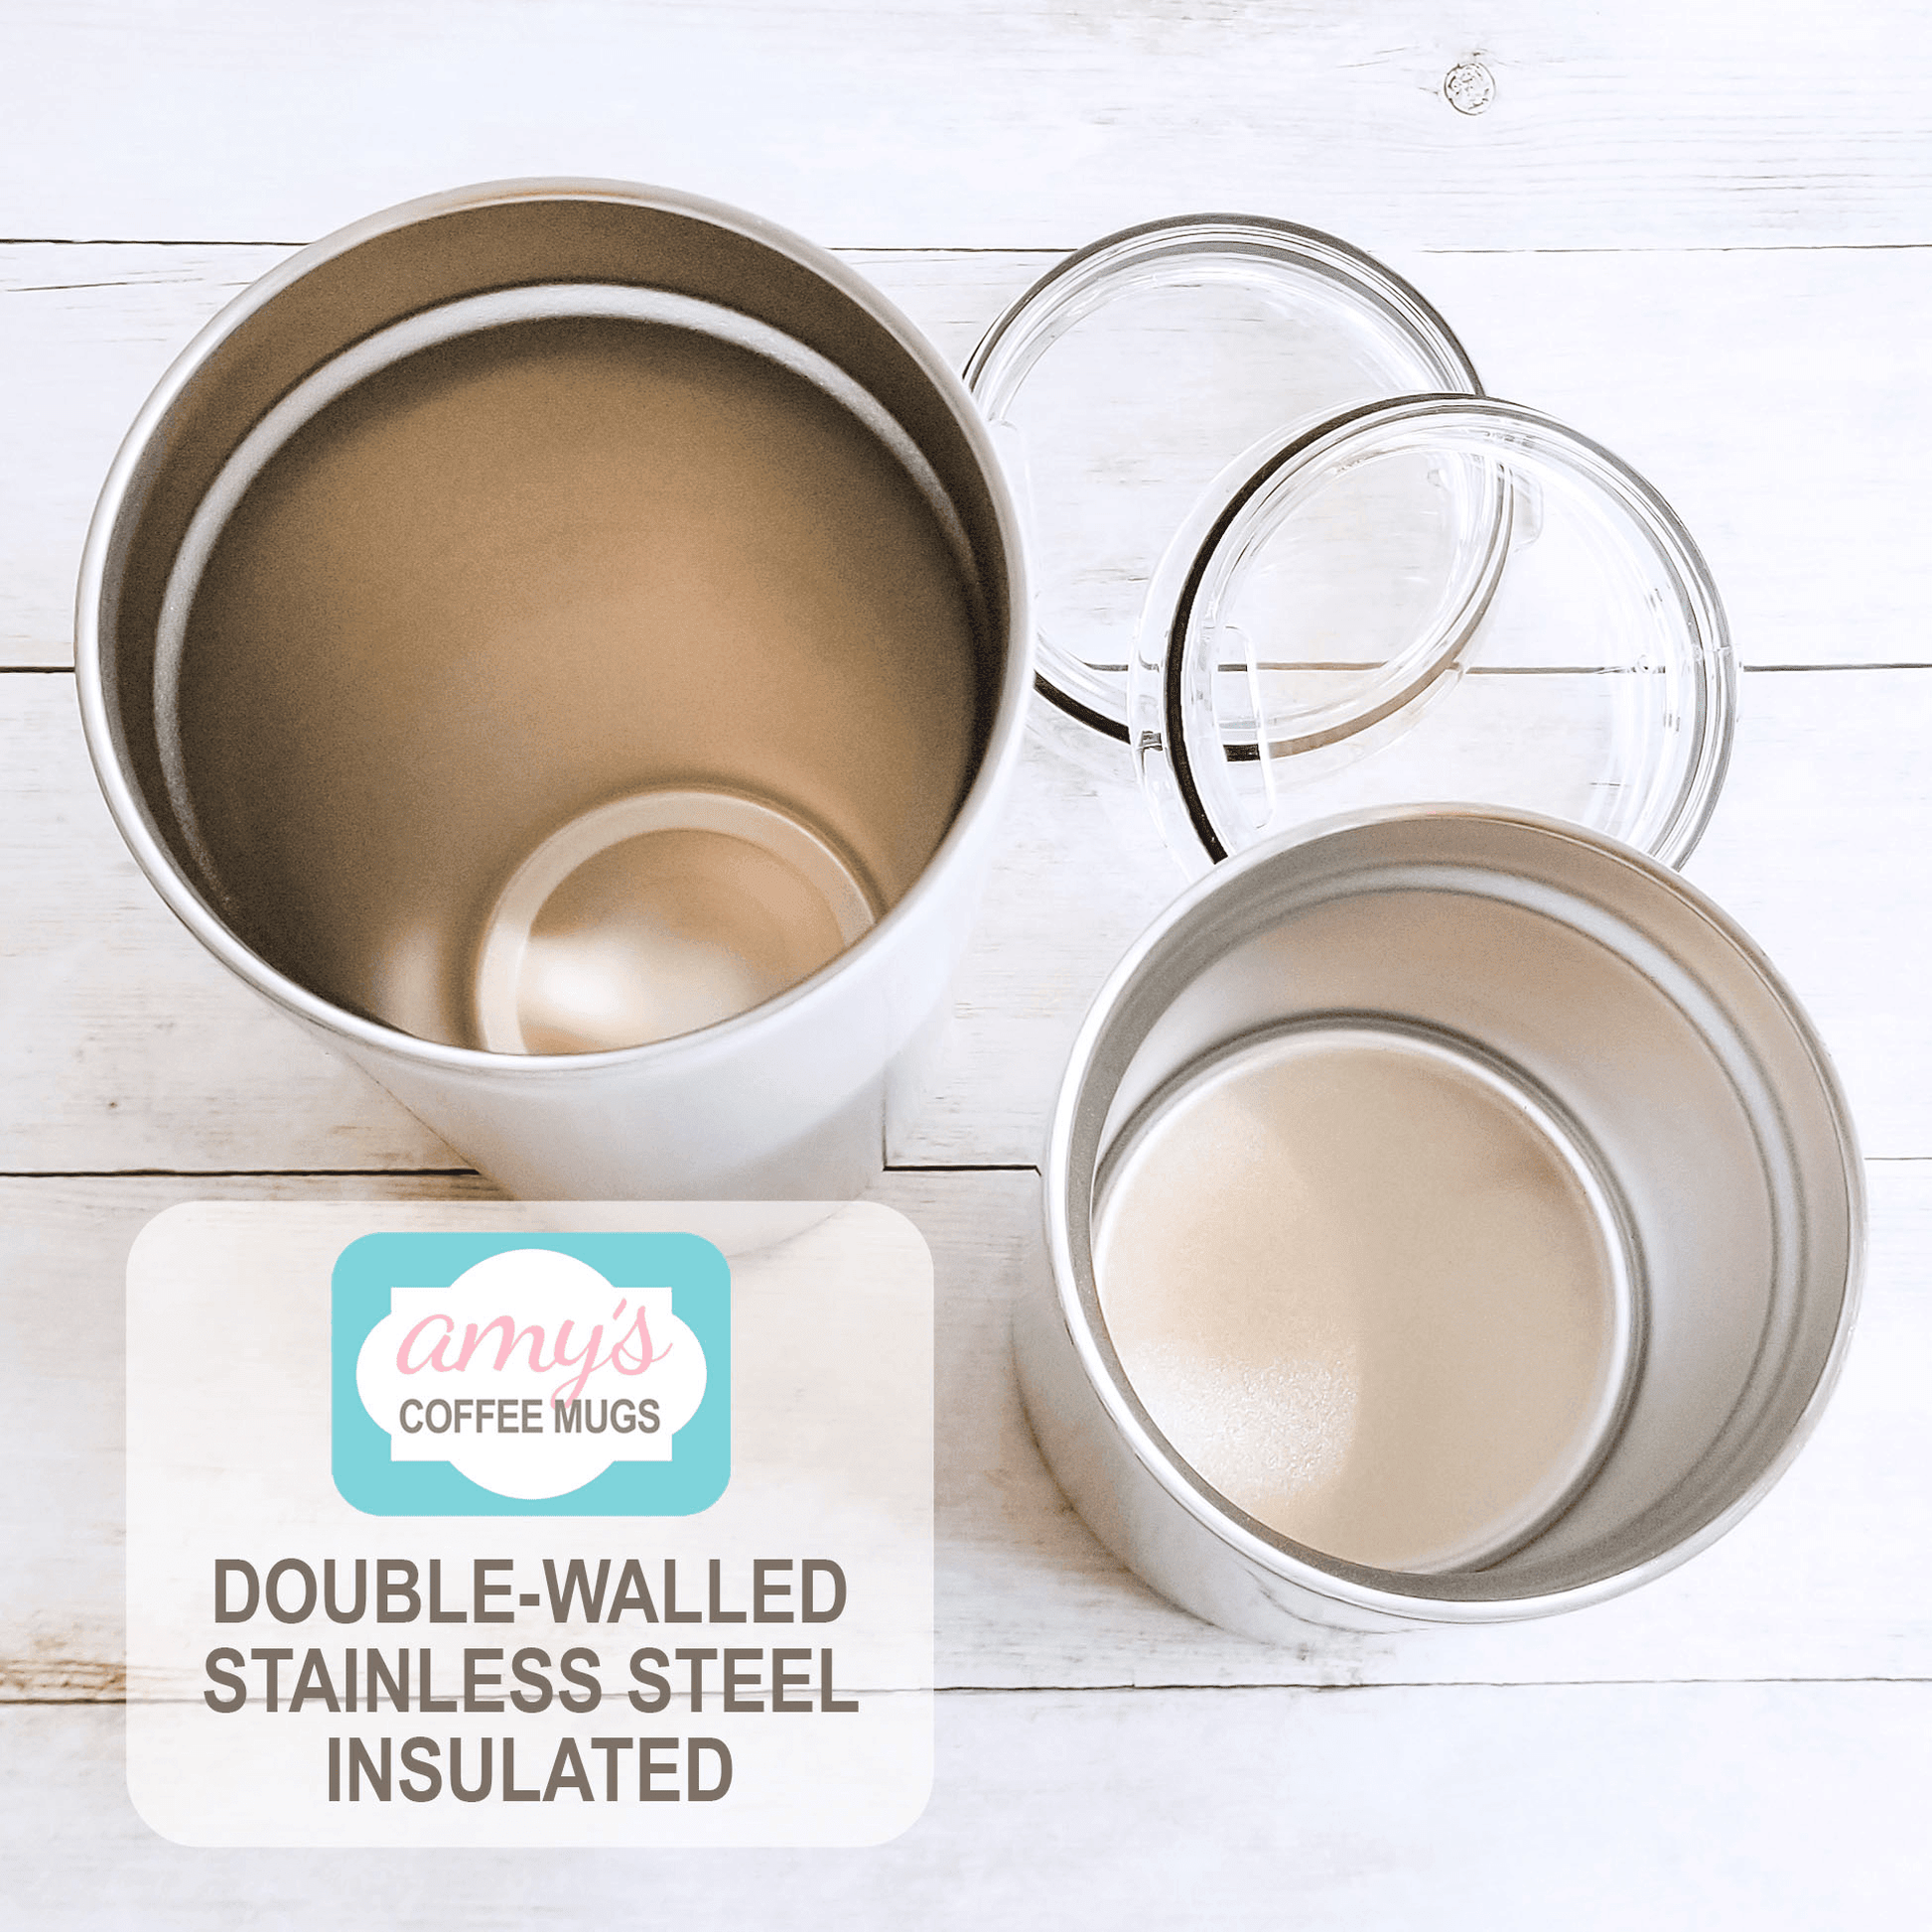 Double-walled stainless steel insulated Tumbler Cup at Amy's Coffee Mugs